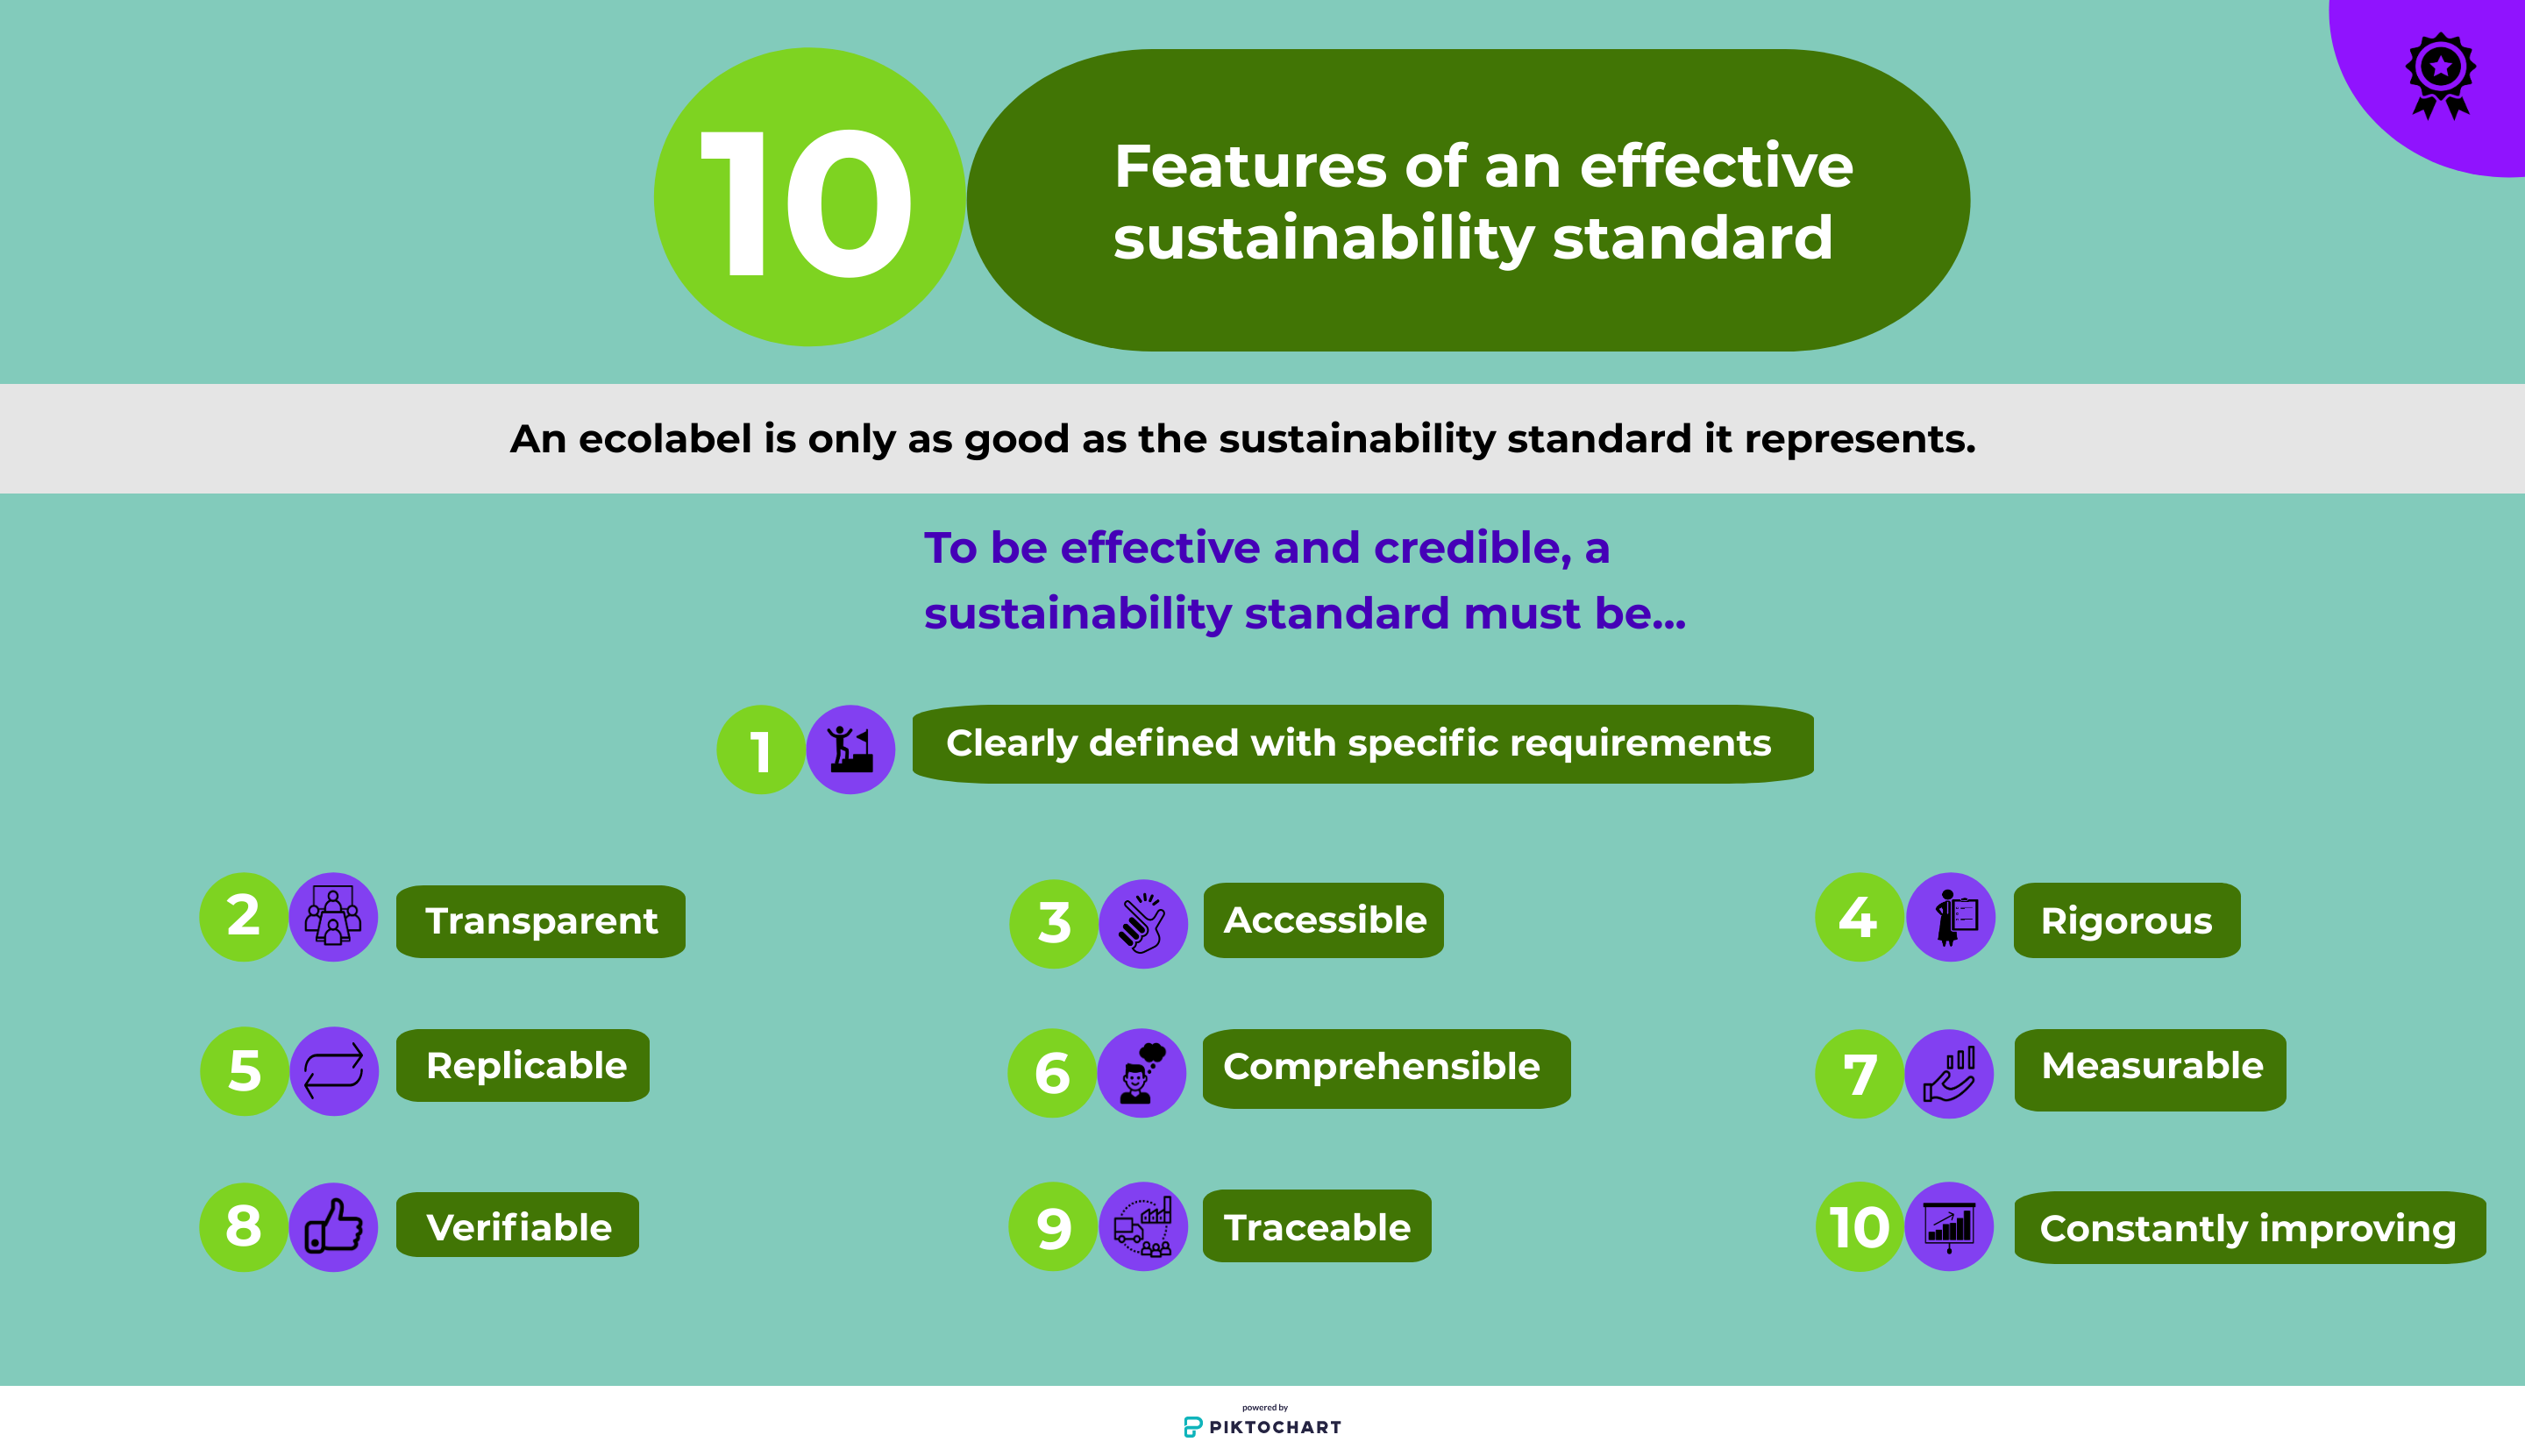 10 features of an effective sustainability standard